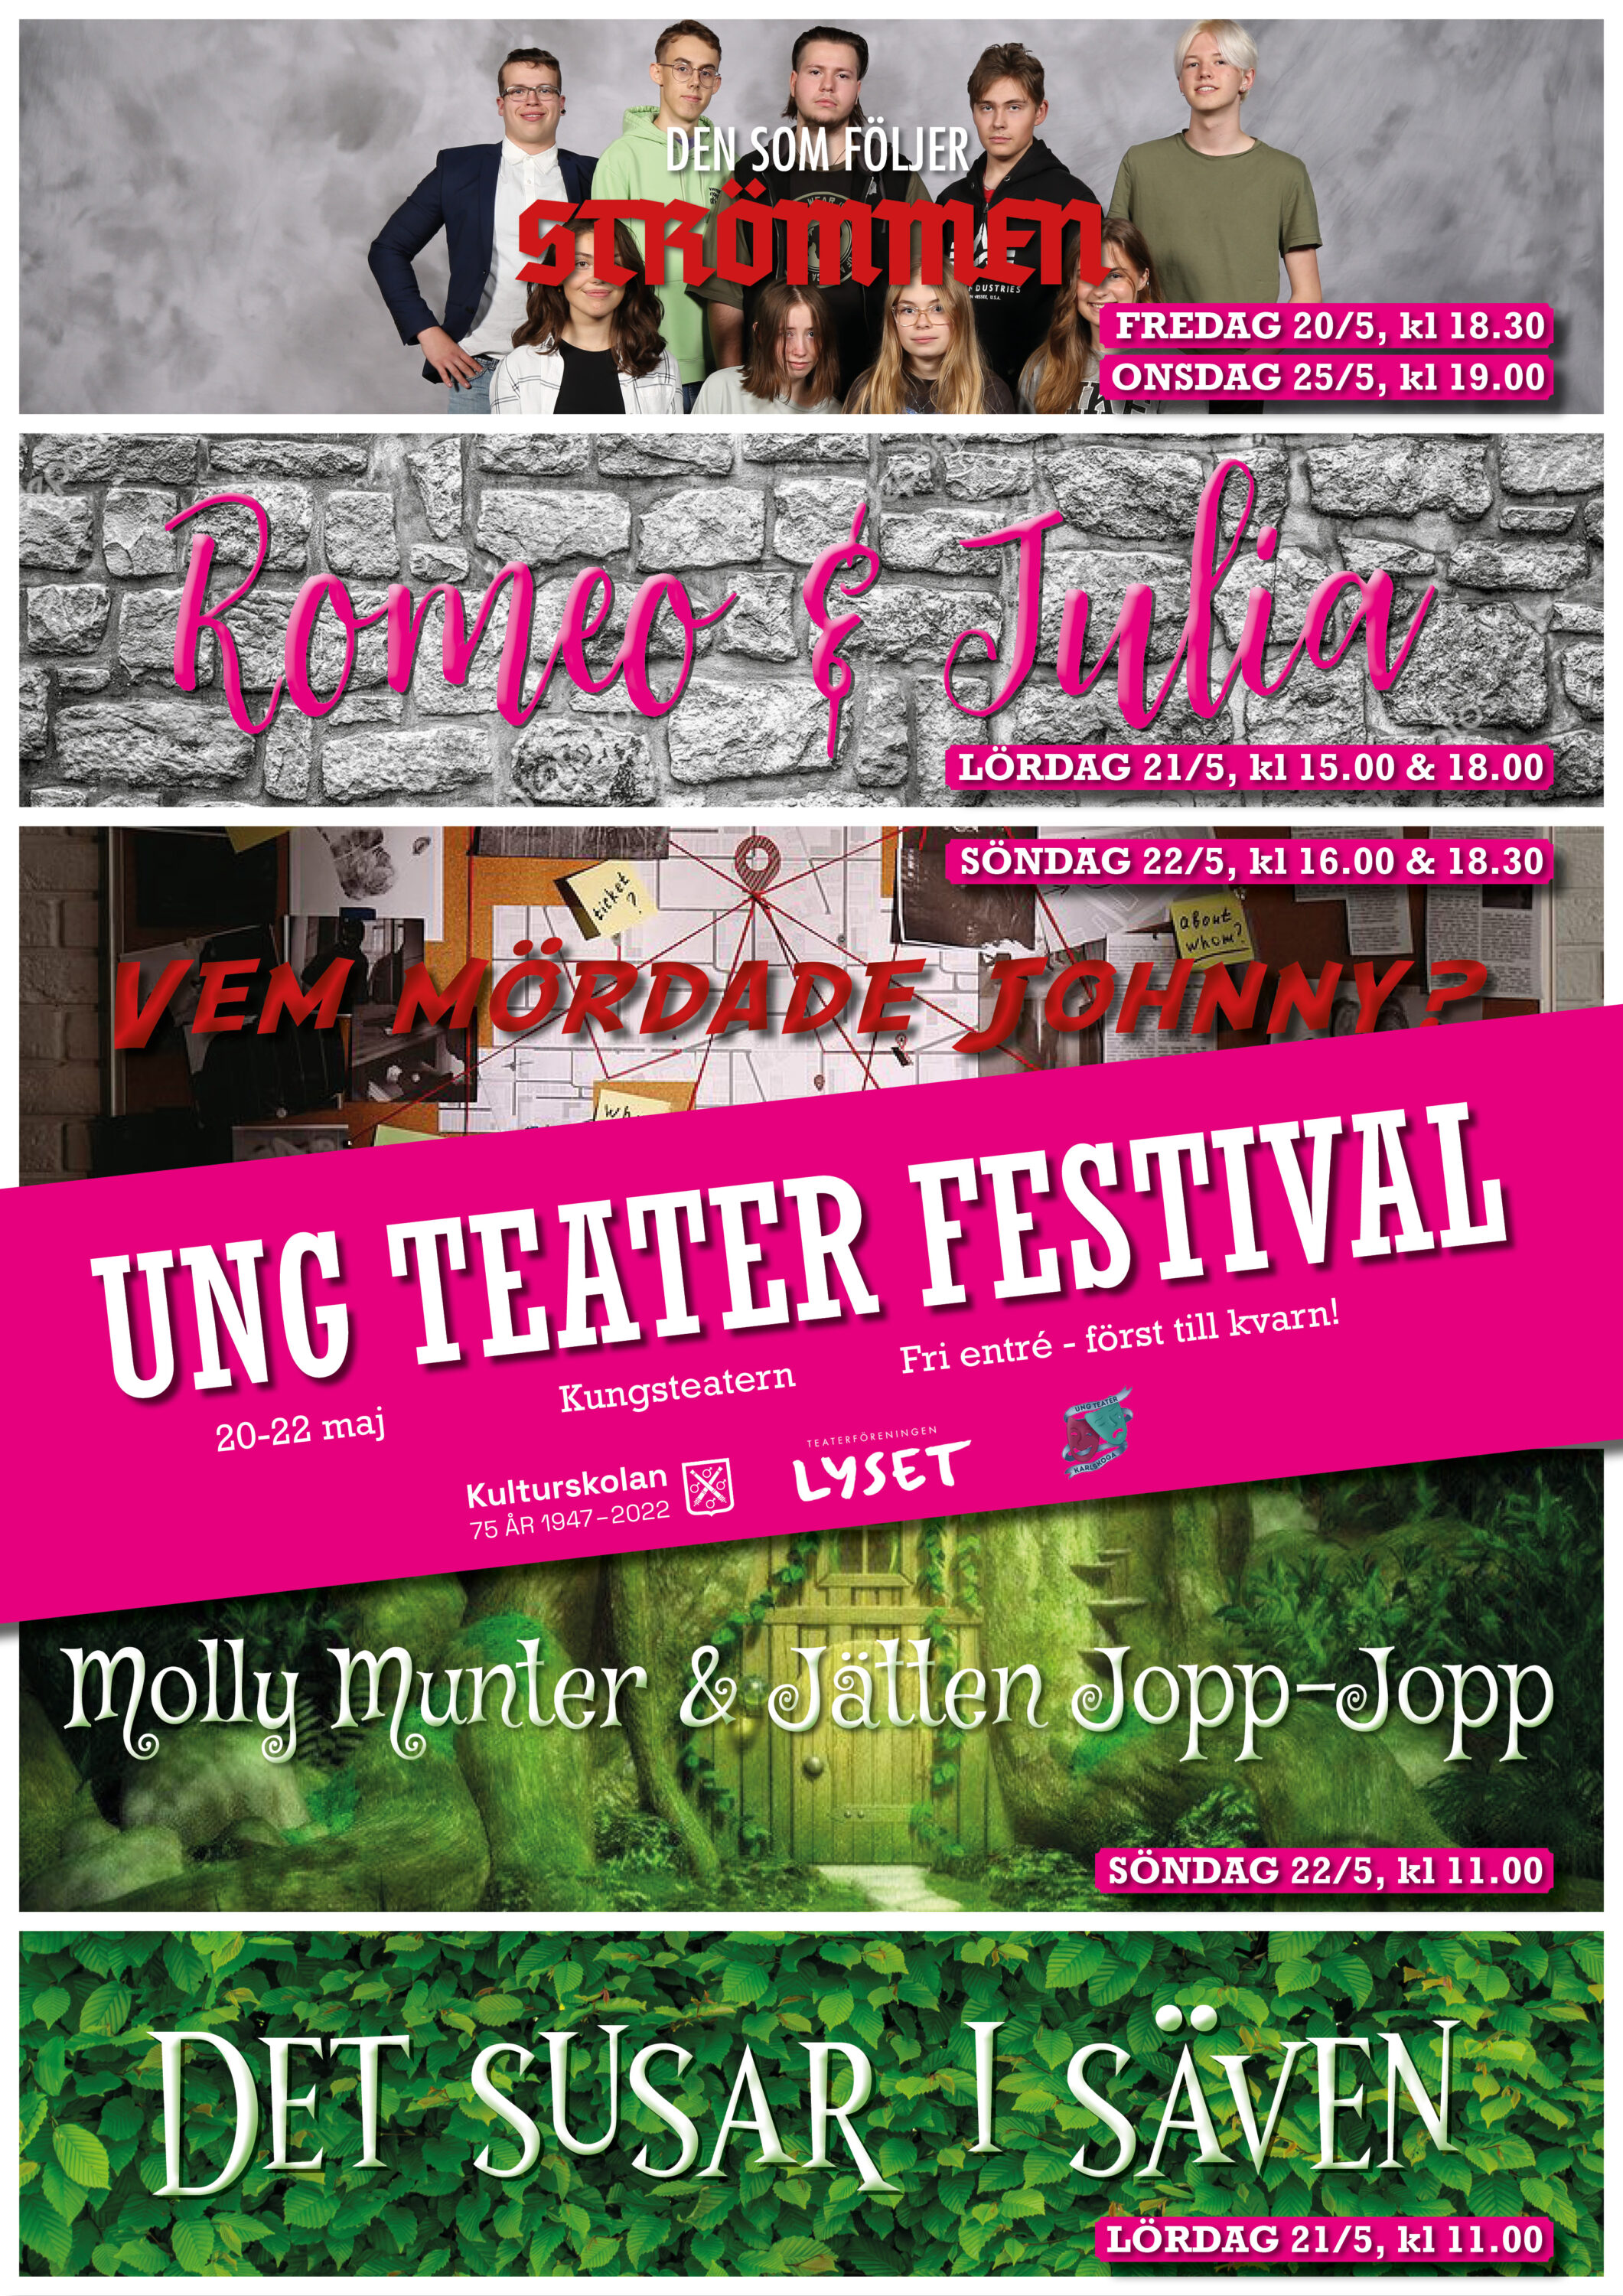 Ung Teaterfestival